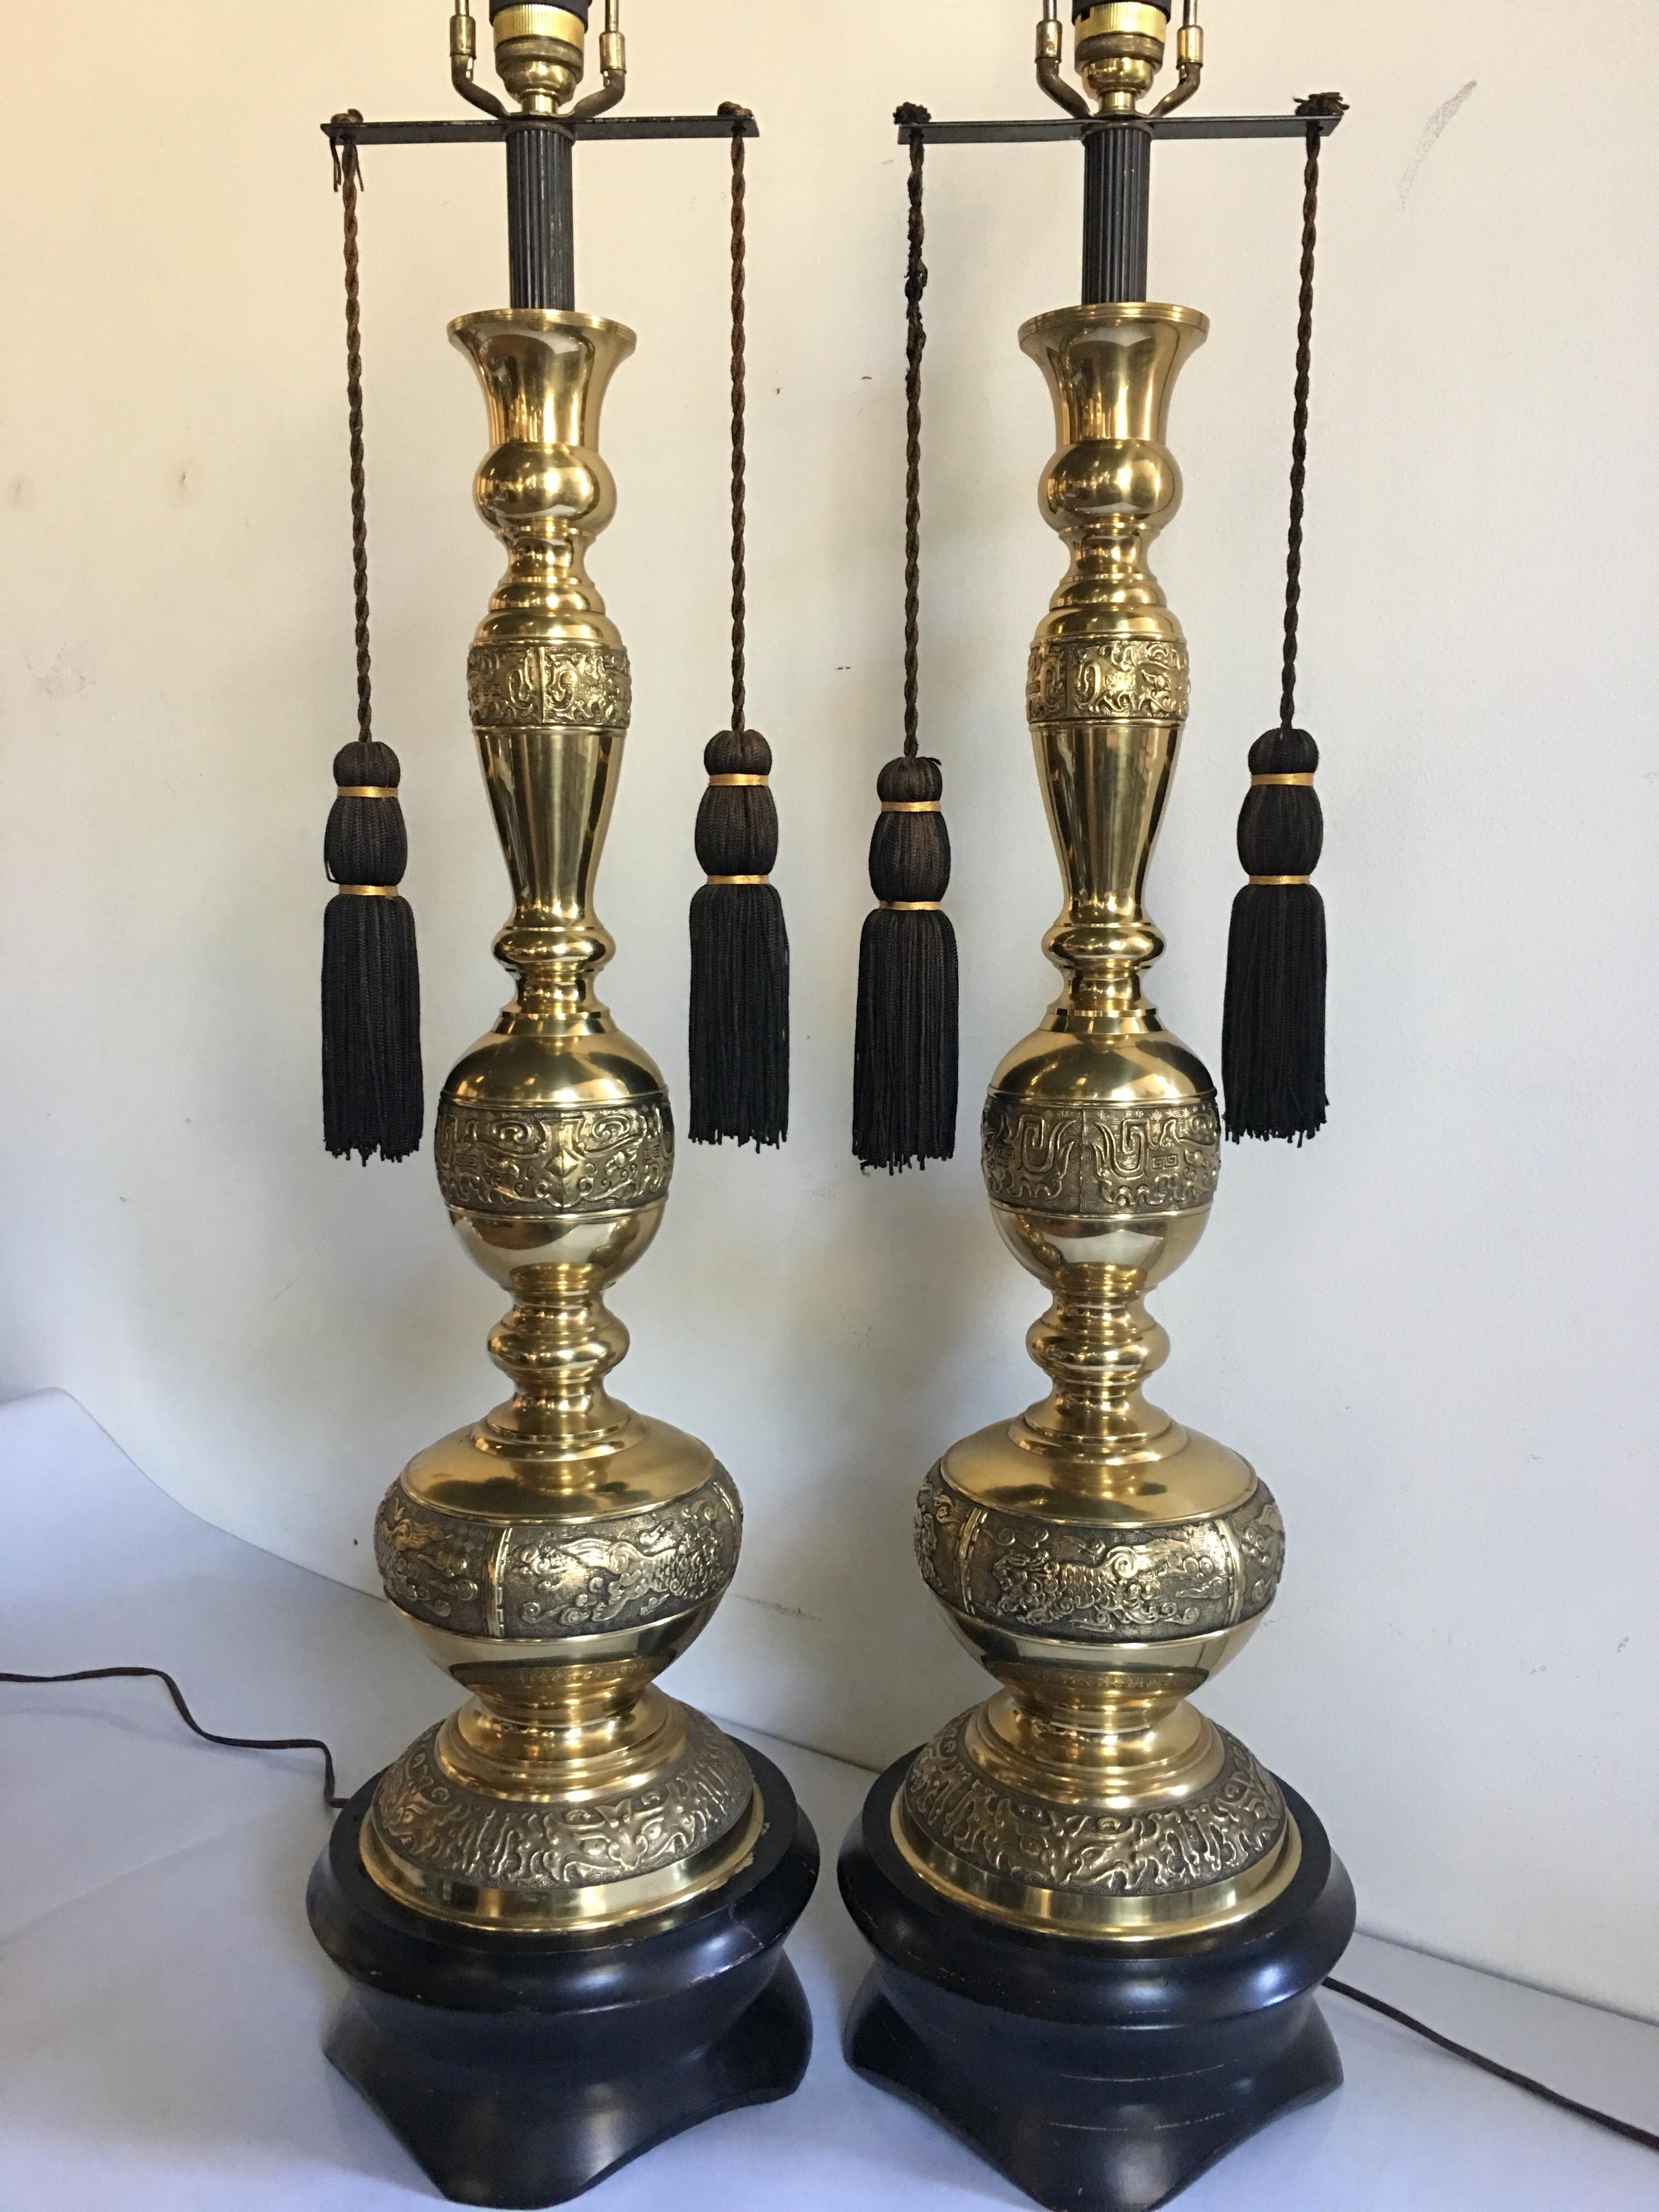 Pair of massive Hollywood Regency style finely cast brass lamps with Asian / Chinese and Greek key inspired motifs. These tall chinoiserie style table lamps features decorative tassels and are mounted on black plinth wood bases. Lamps turn on and